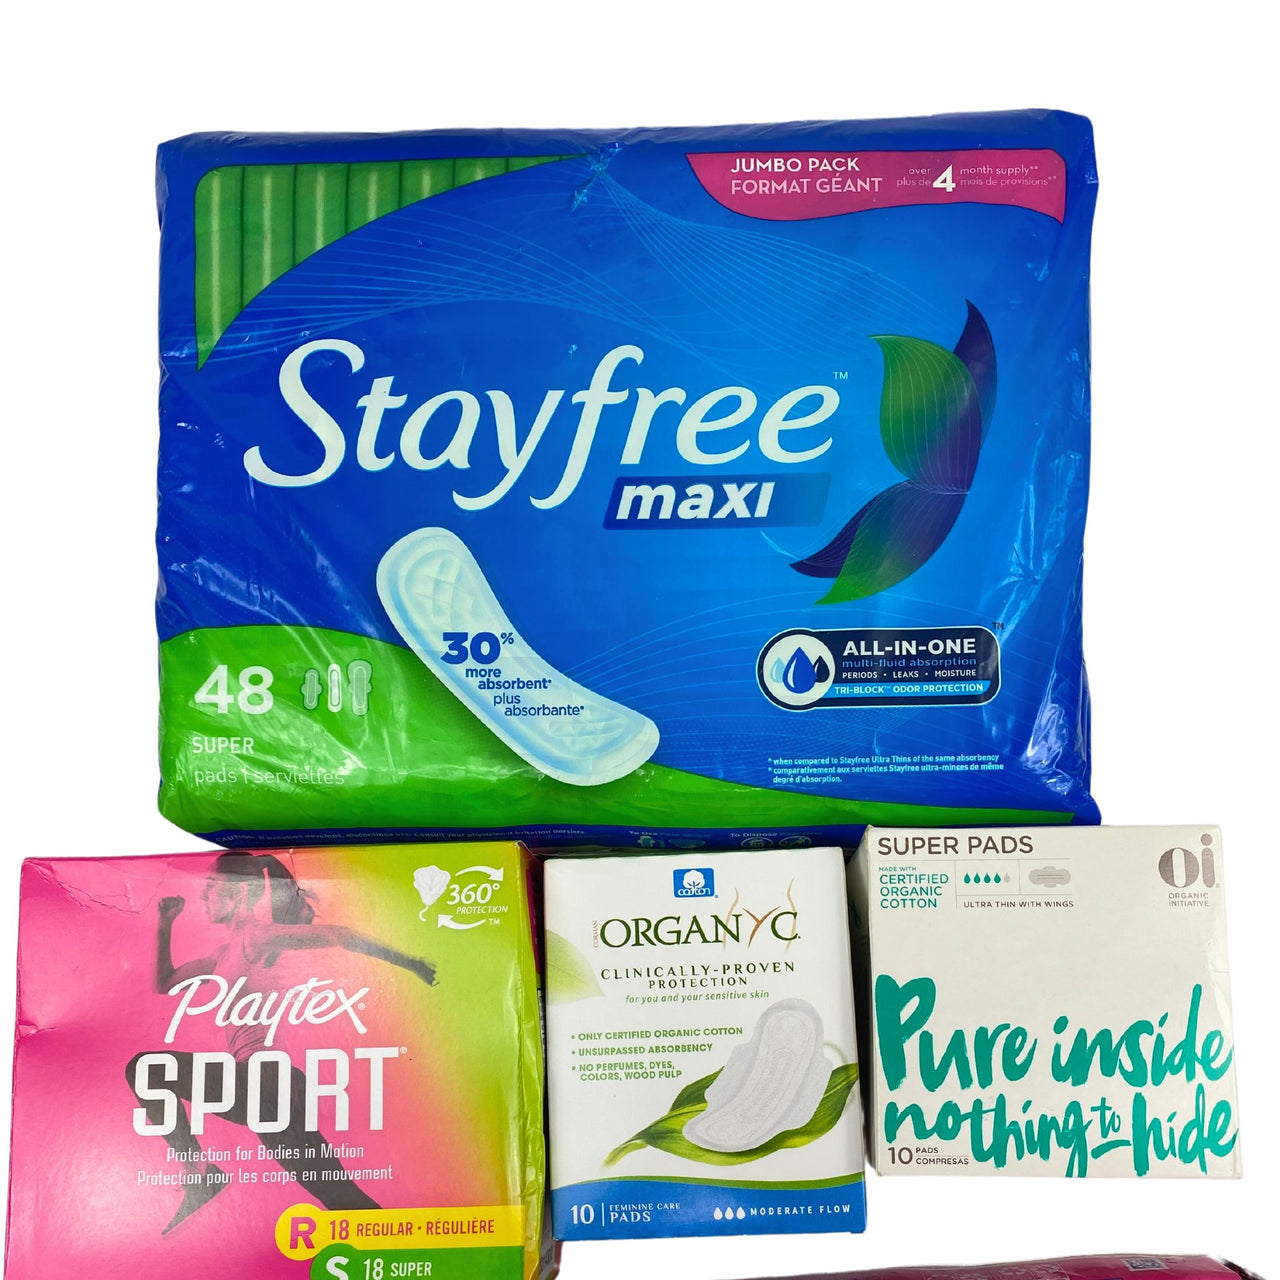 Feminine Care Assorted Mix Includes Tampons & Pads